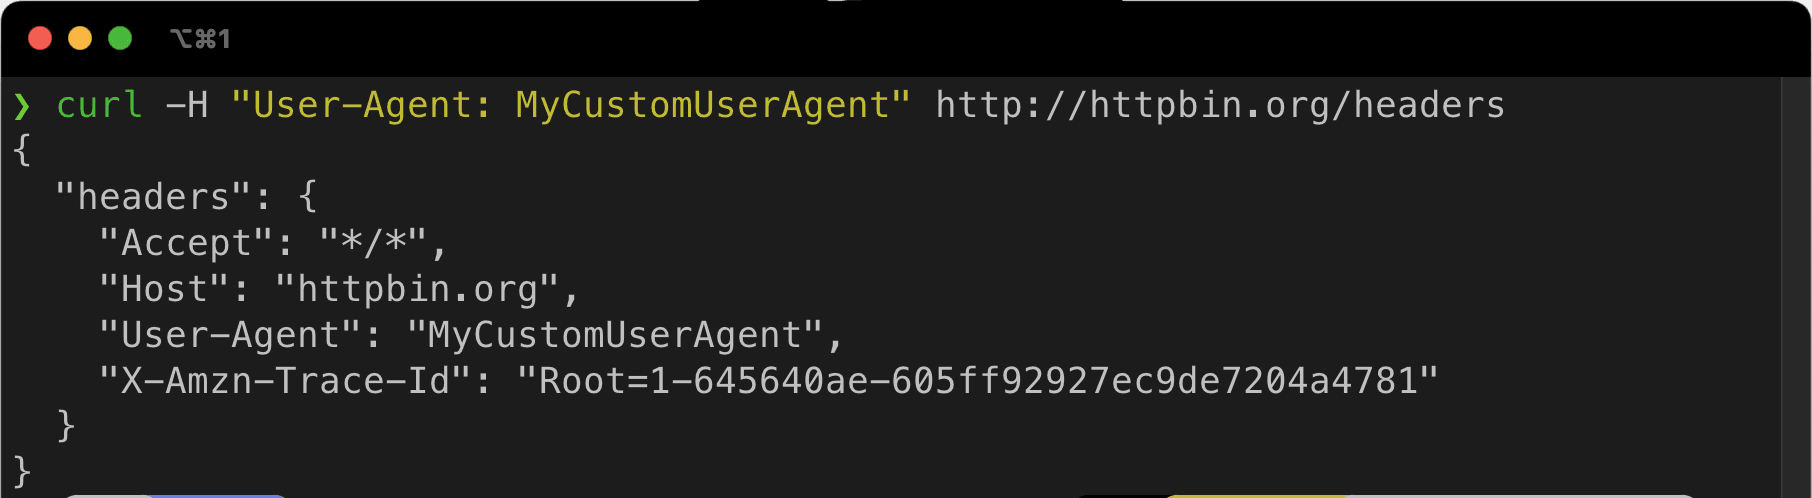 Changing the value of User-Agent